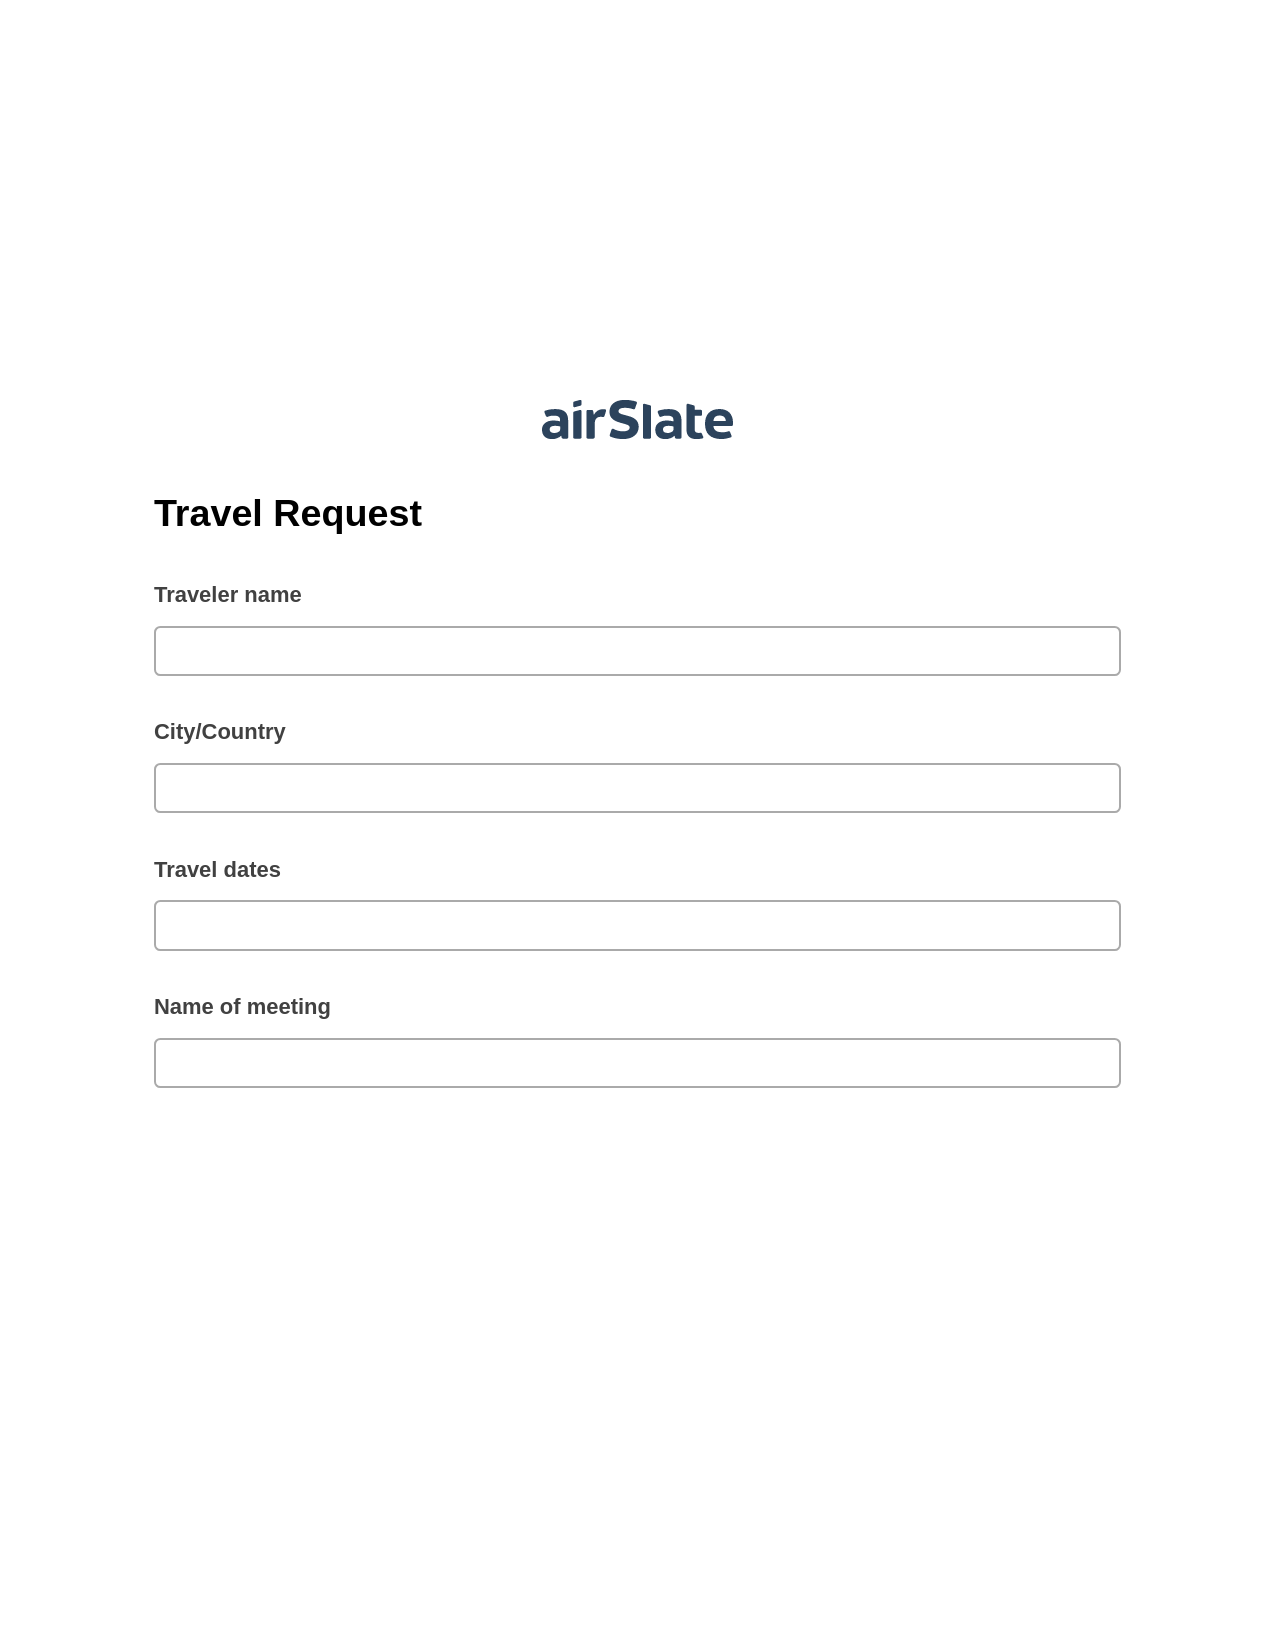 Multirole Travel Request Pre-fill Dropdowns from Google Sheet Bot, Create slate addon, Export to NetSuite Record Bot